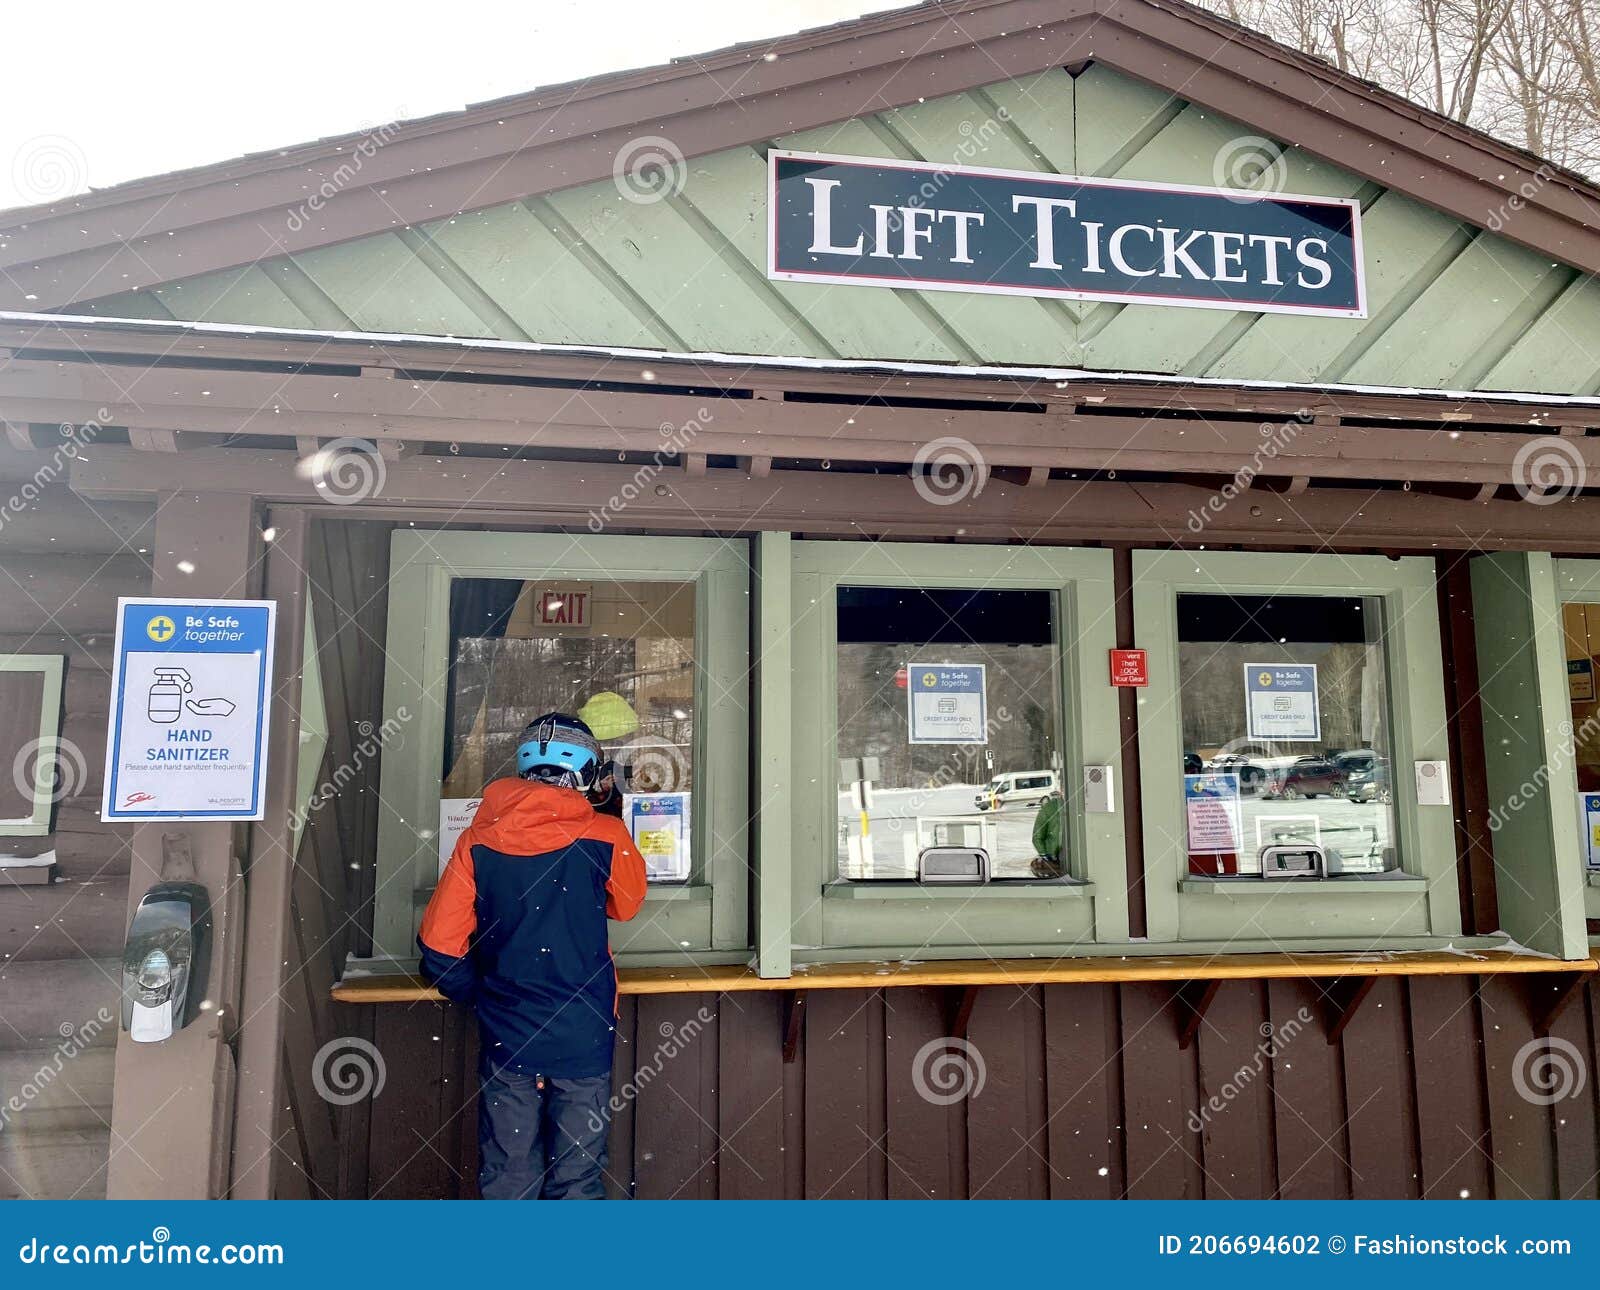 lift-tickets-booth-windows-at-stowe-mountain-editorial-photography